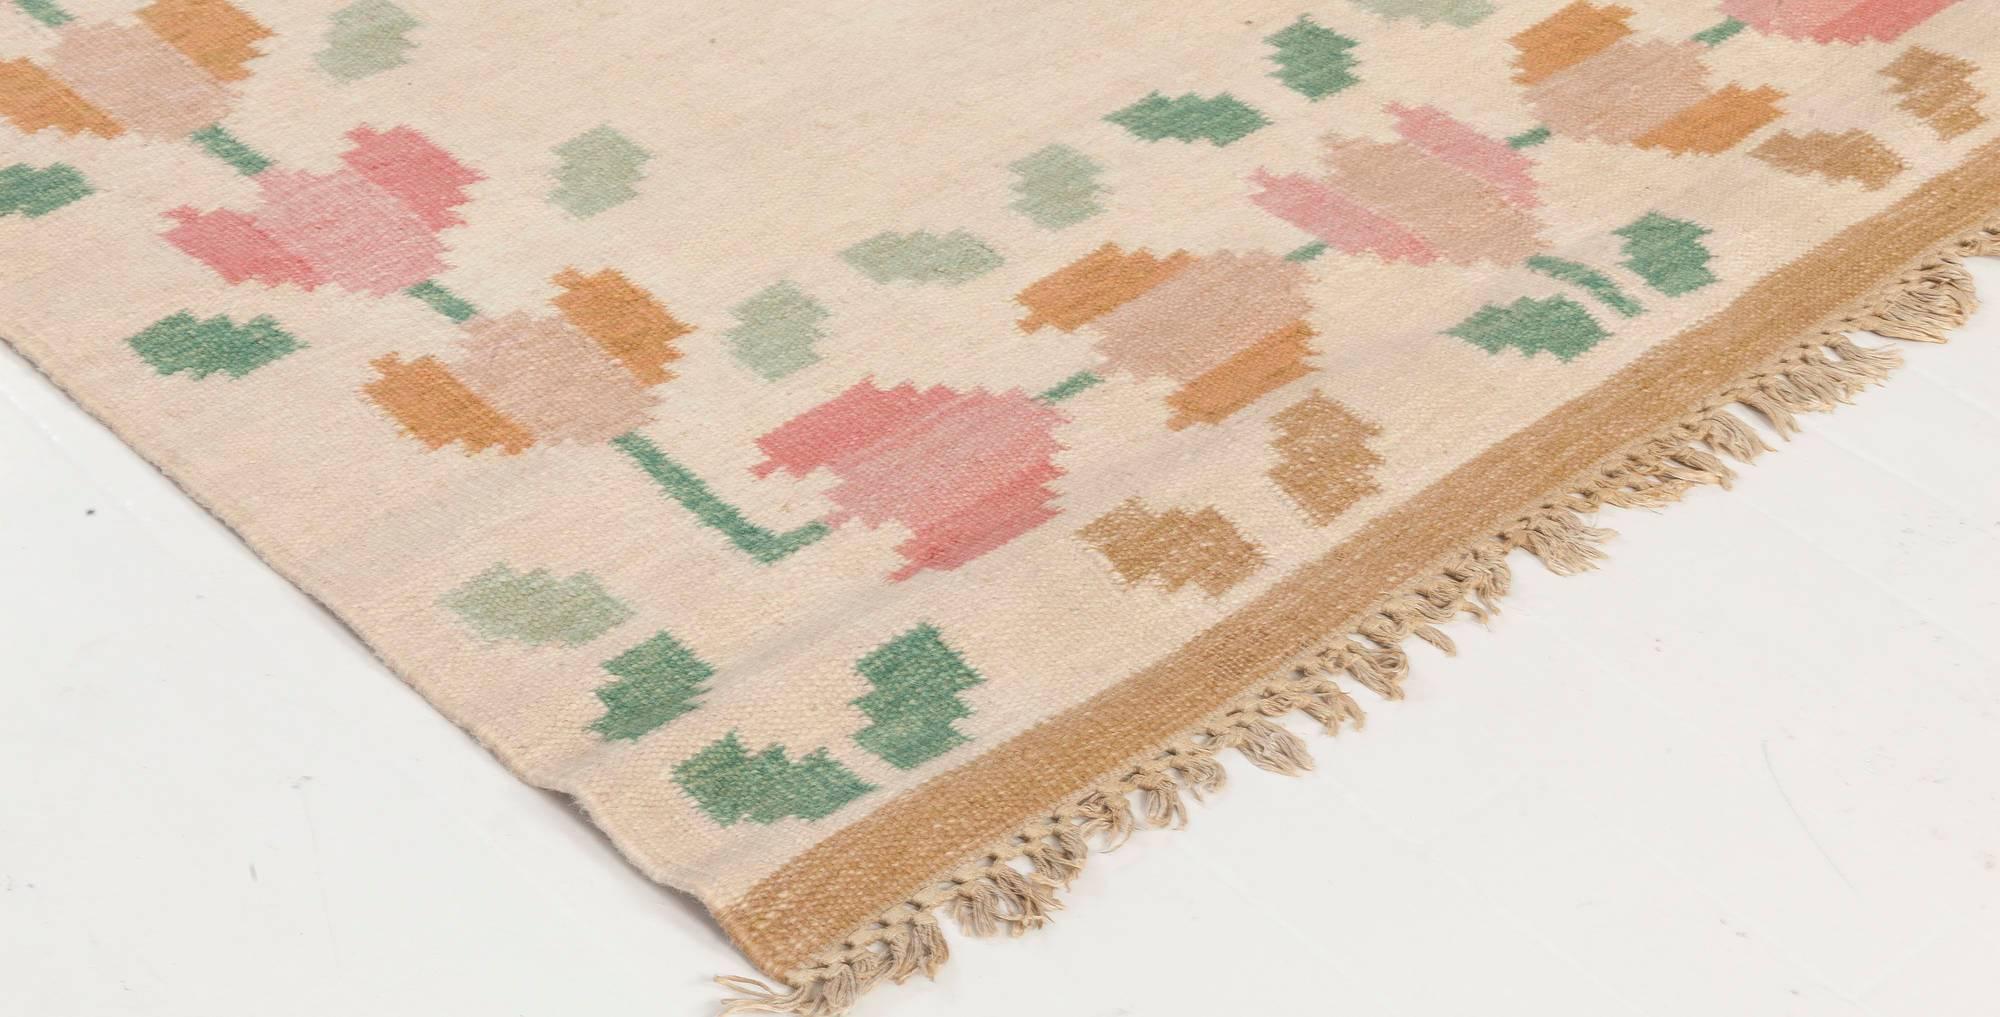 20th Century Vintage Swedish Flat-Weave Rug Signed by Anne Marie Boberg